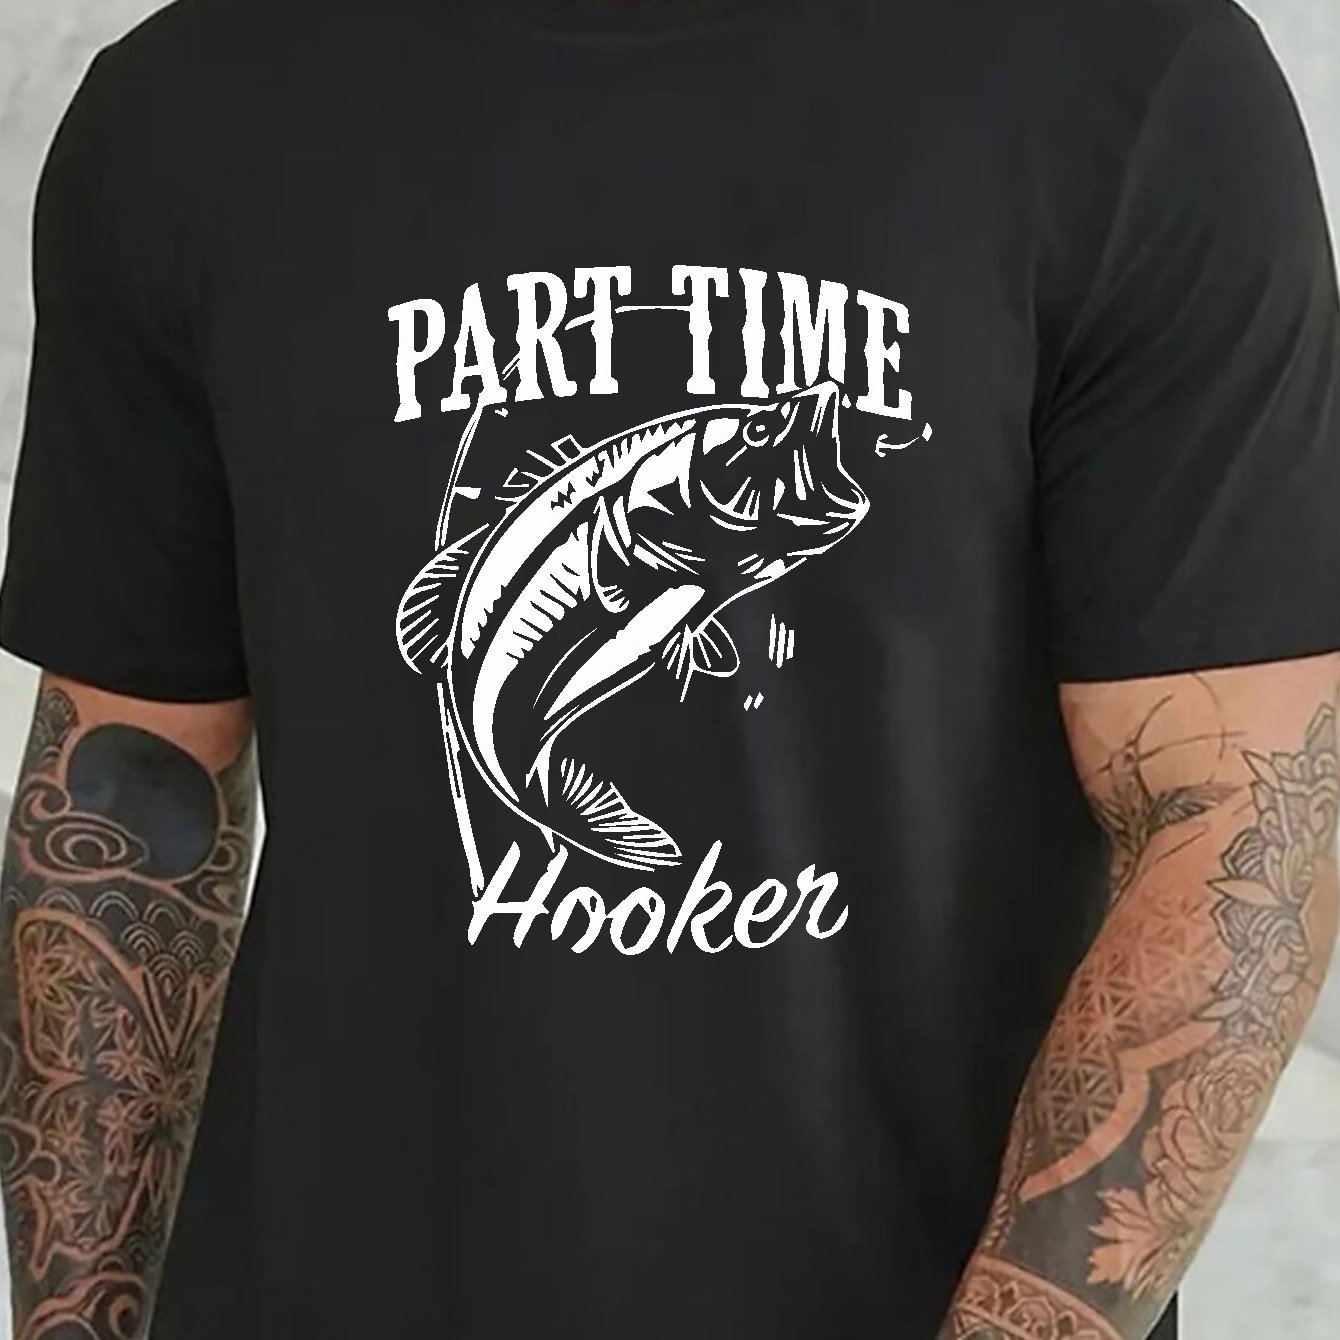 Men's PART TIME HOOKER & Fish Graphic Print T-shirt For Sports, Summer  Trendy Short-sleeve Tees For Big & Tall Males, Plus Size